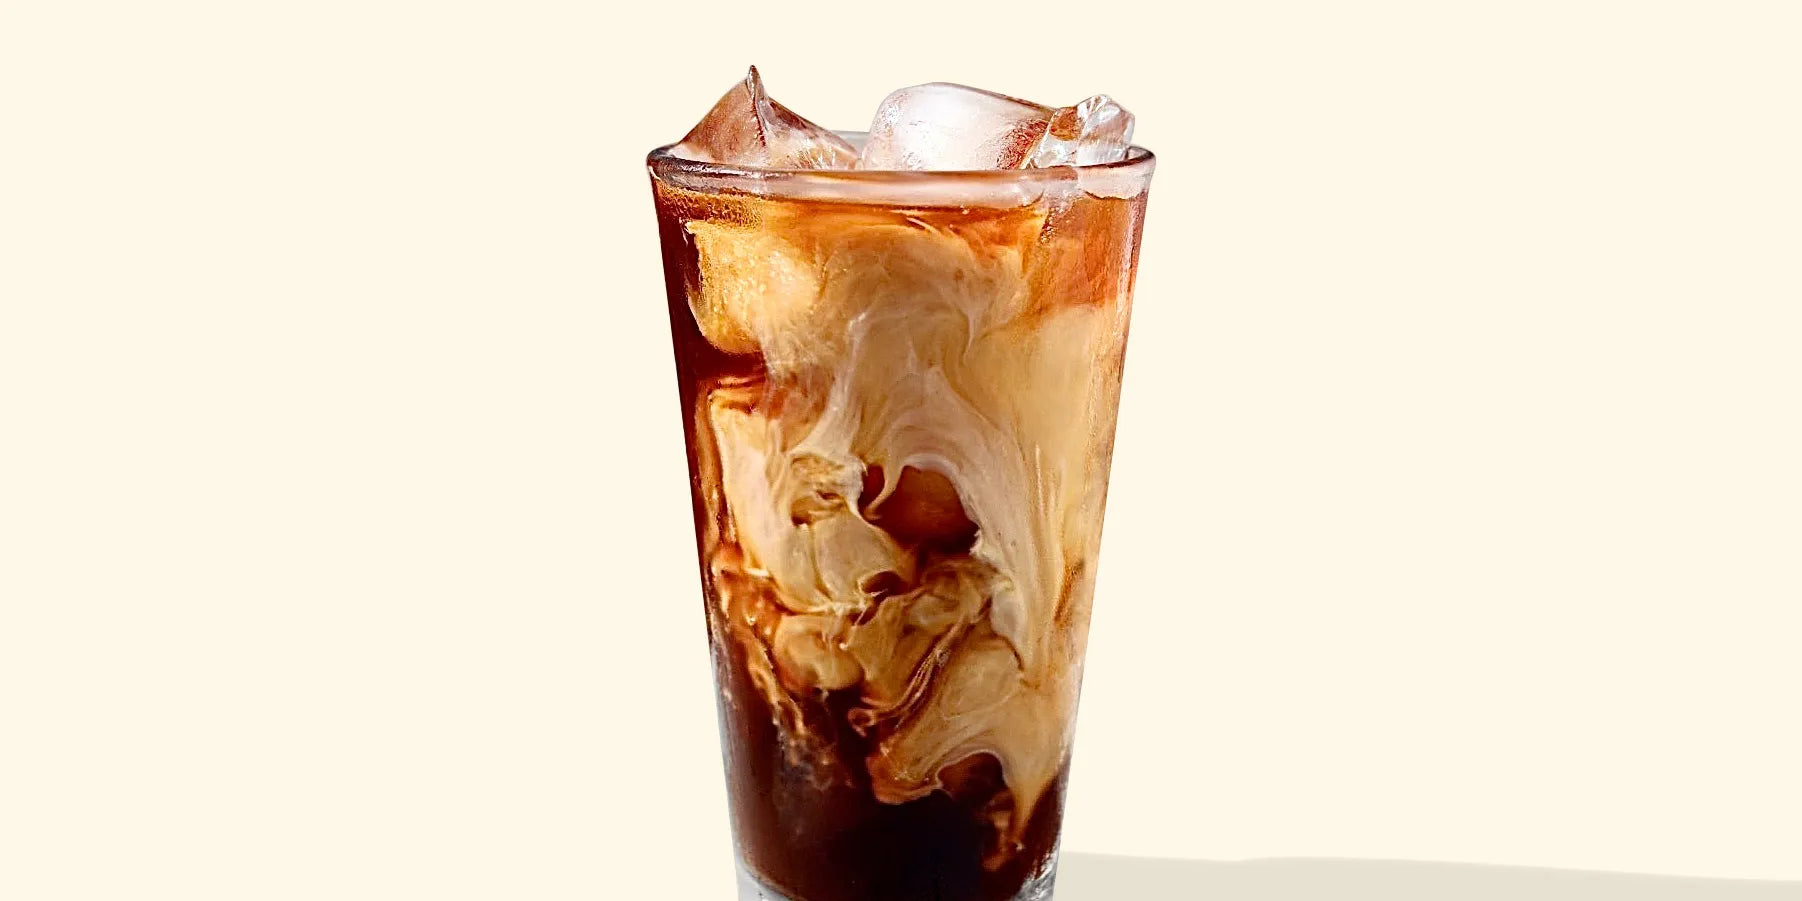 http://cdn.shopify.com/s/files/1/0549/3886/1756/products/Mexican-Breakfast-Iced-Cafe-de-Olla.webp?v=1675139370